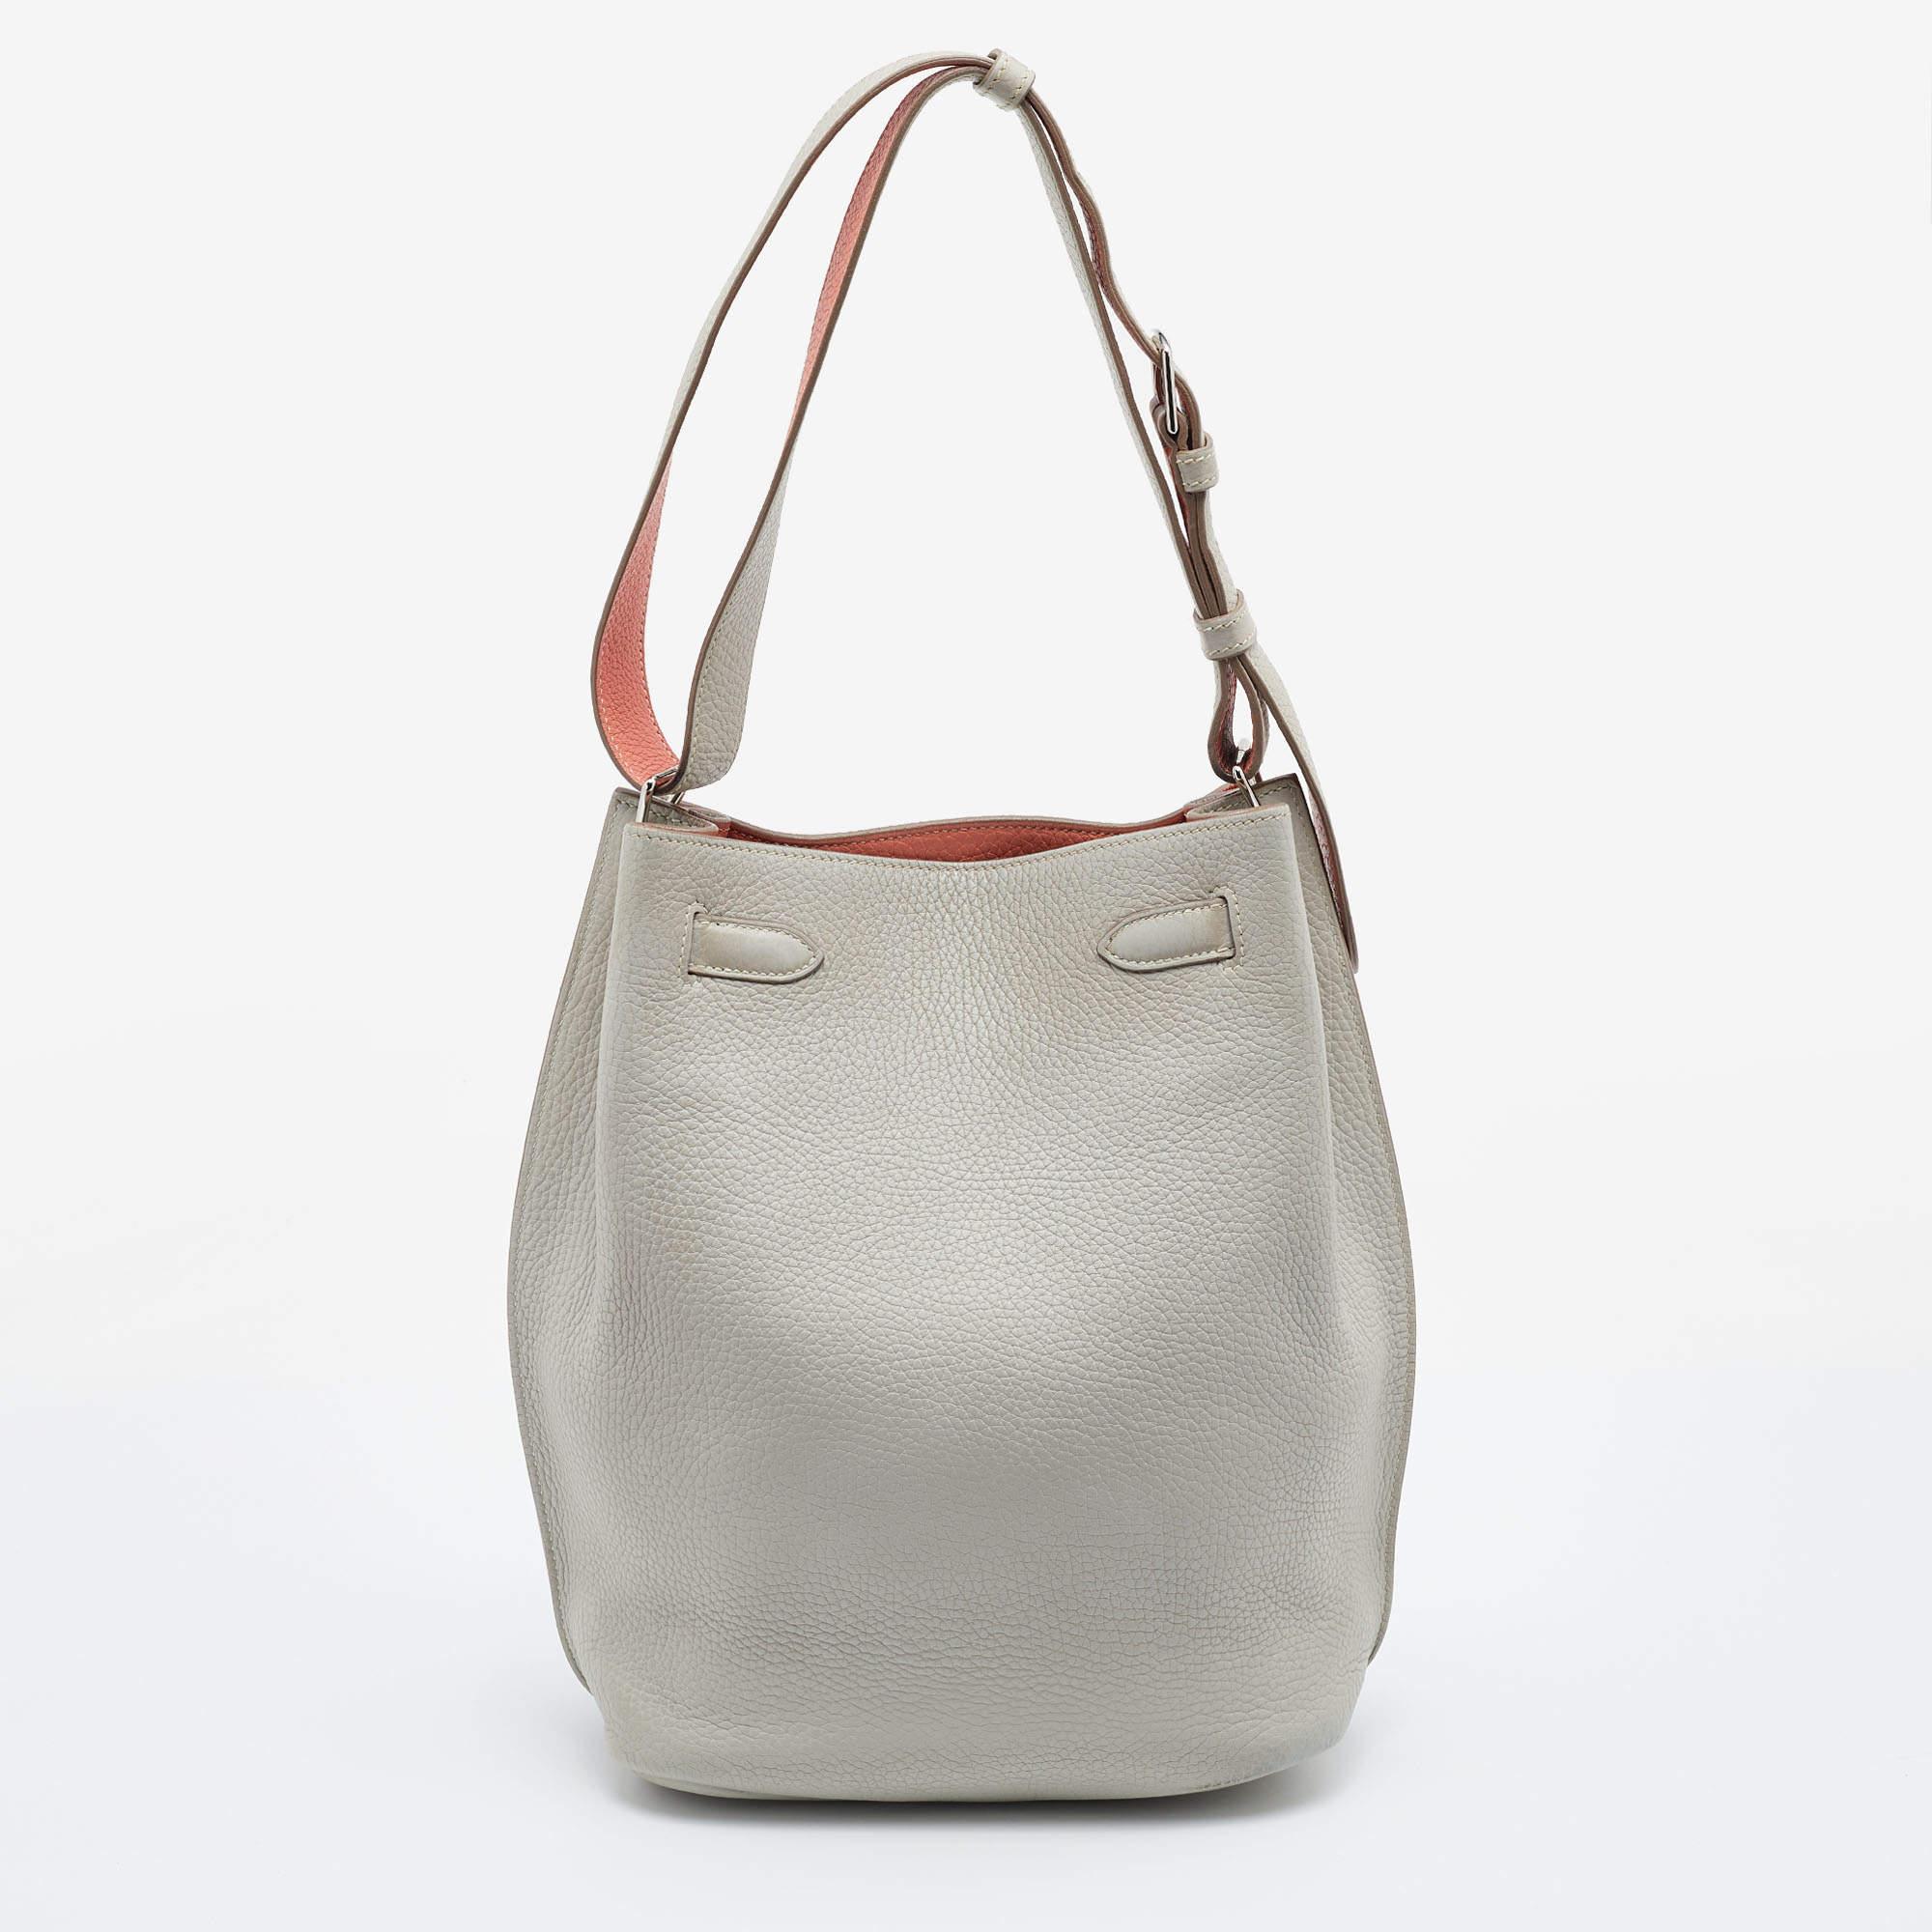 The elegant and timeless elements of the iconic Kelly are coupled with a more casual silhouette in this coveted So Kelly bag. It is crafted from Gris Perle/Crevette leather in a bucket-like shape with the signature Kelly lock in silver-tone metal on